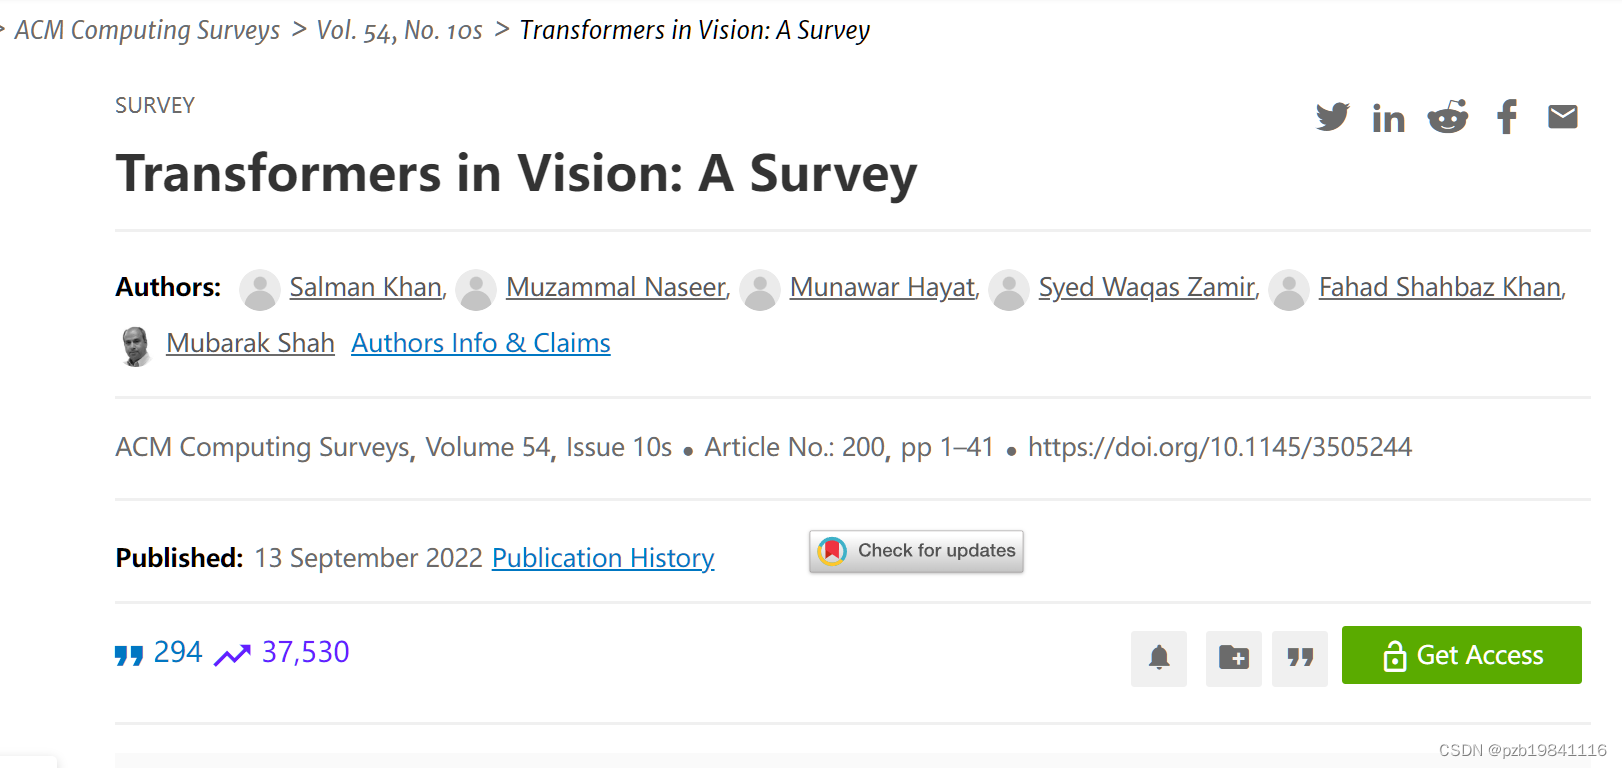 Transformers in Vision:A Survey 阅读笔记